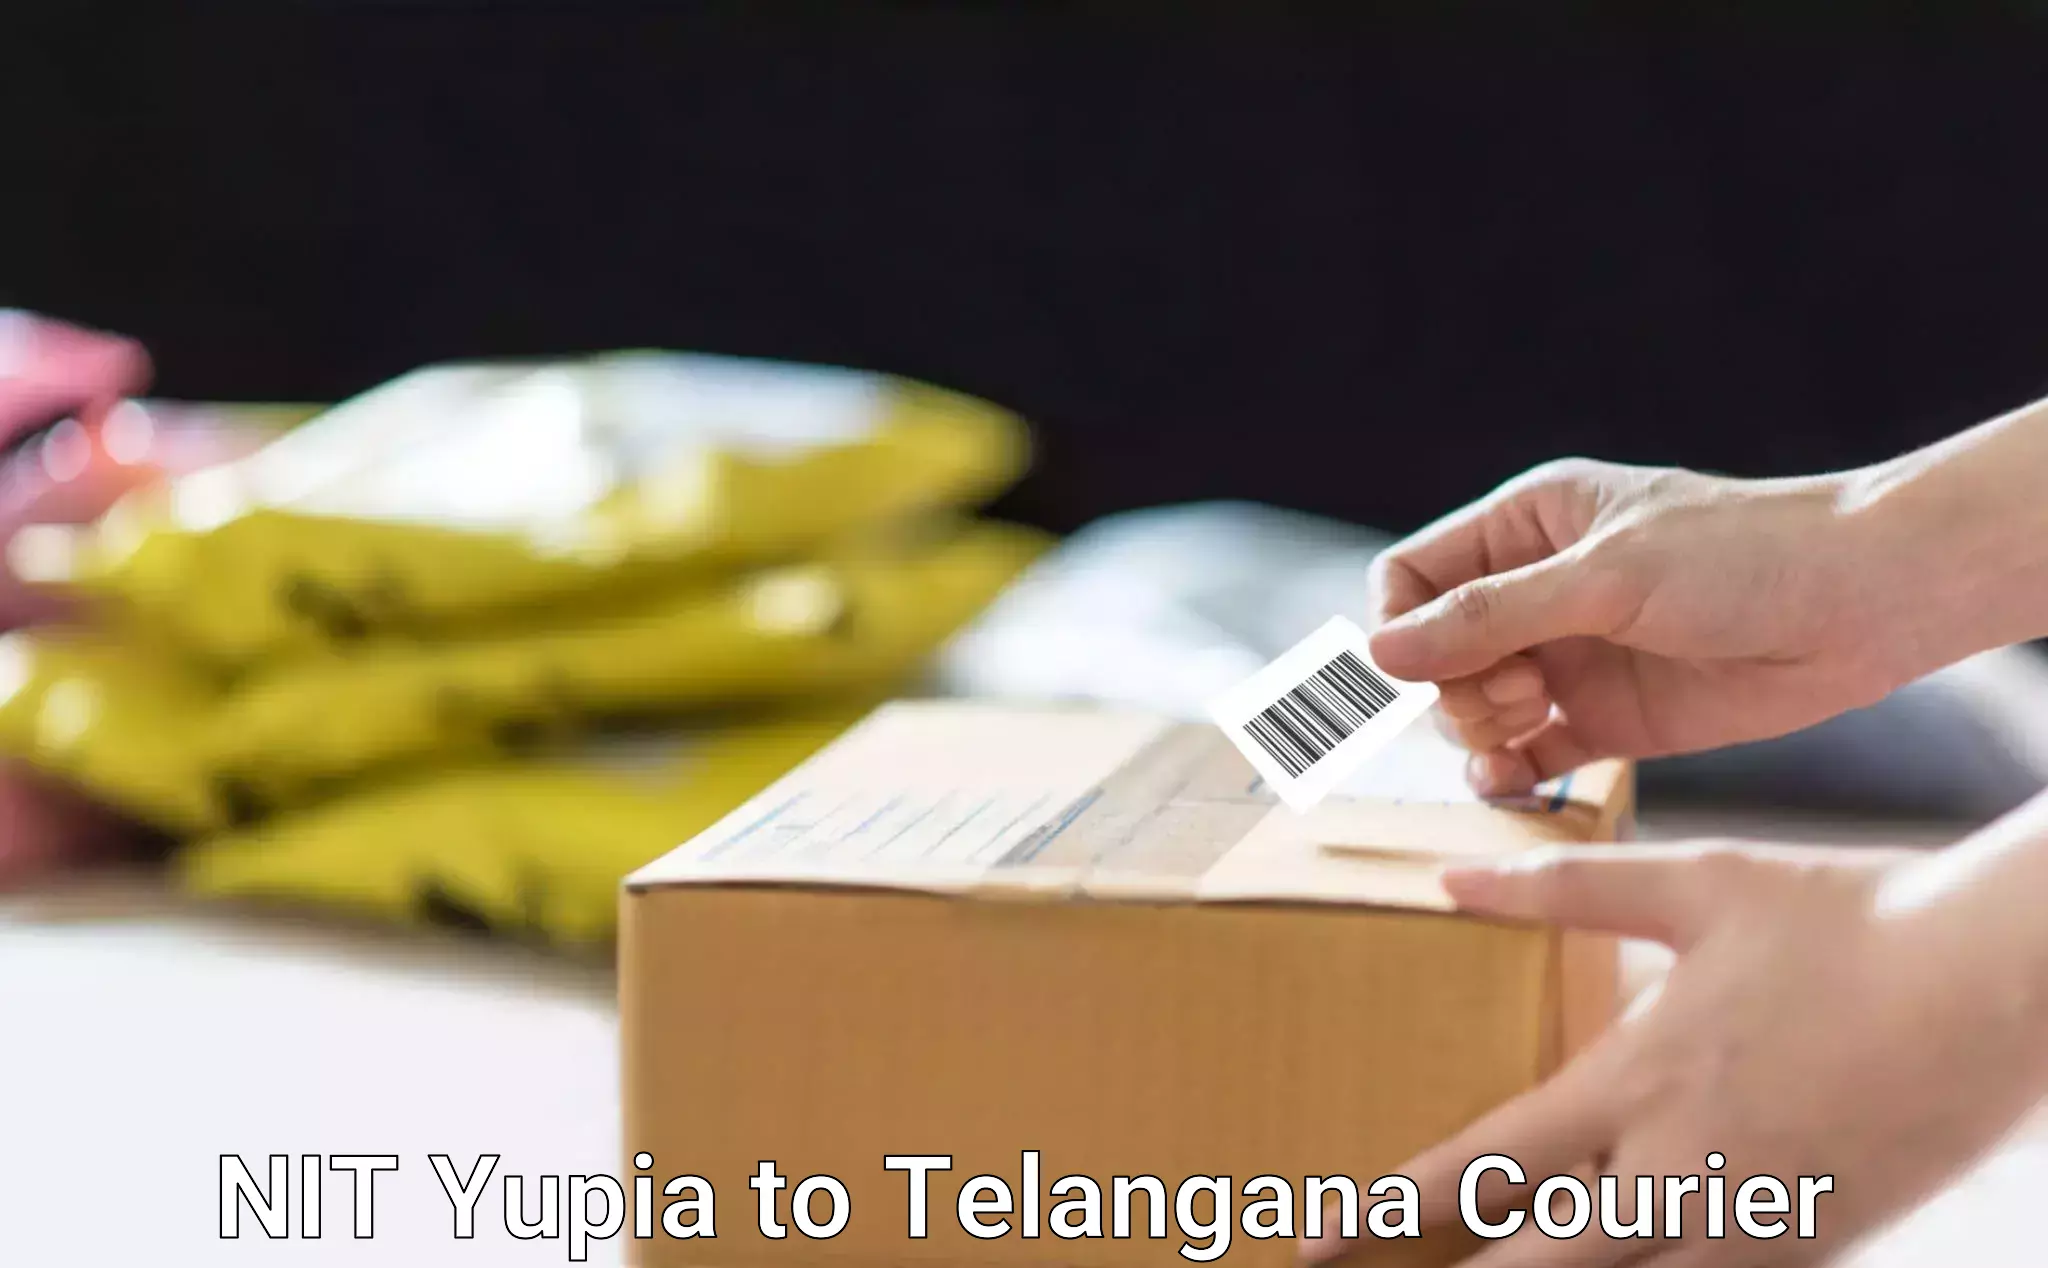 Reliable courier services NIT Yupia to Vemulawada